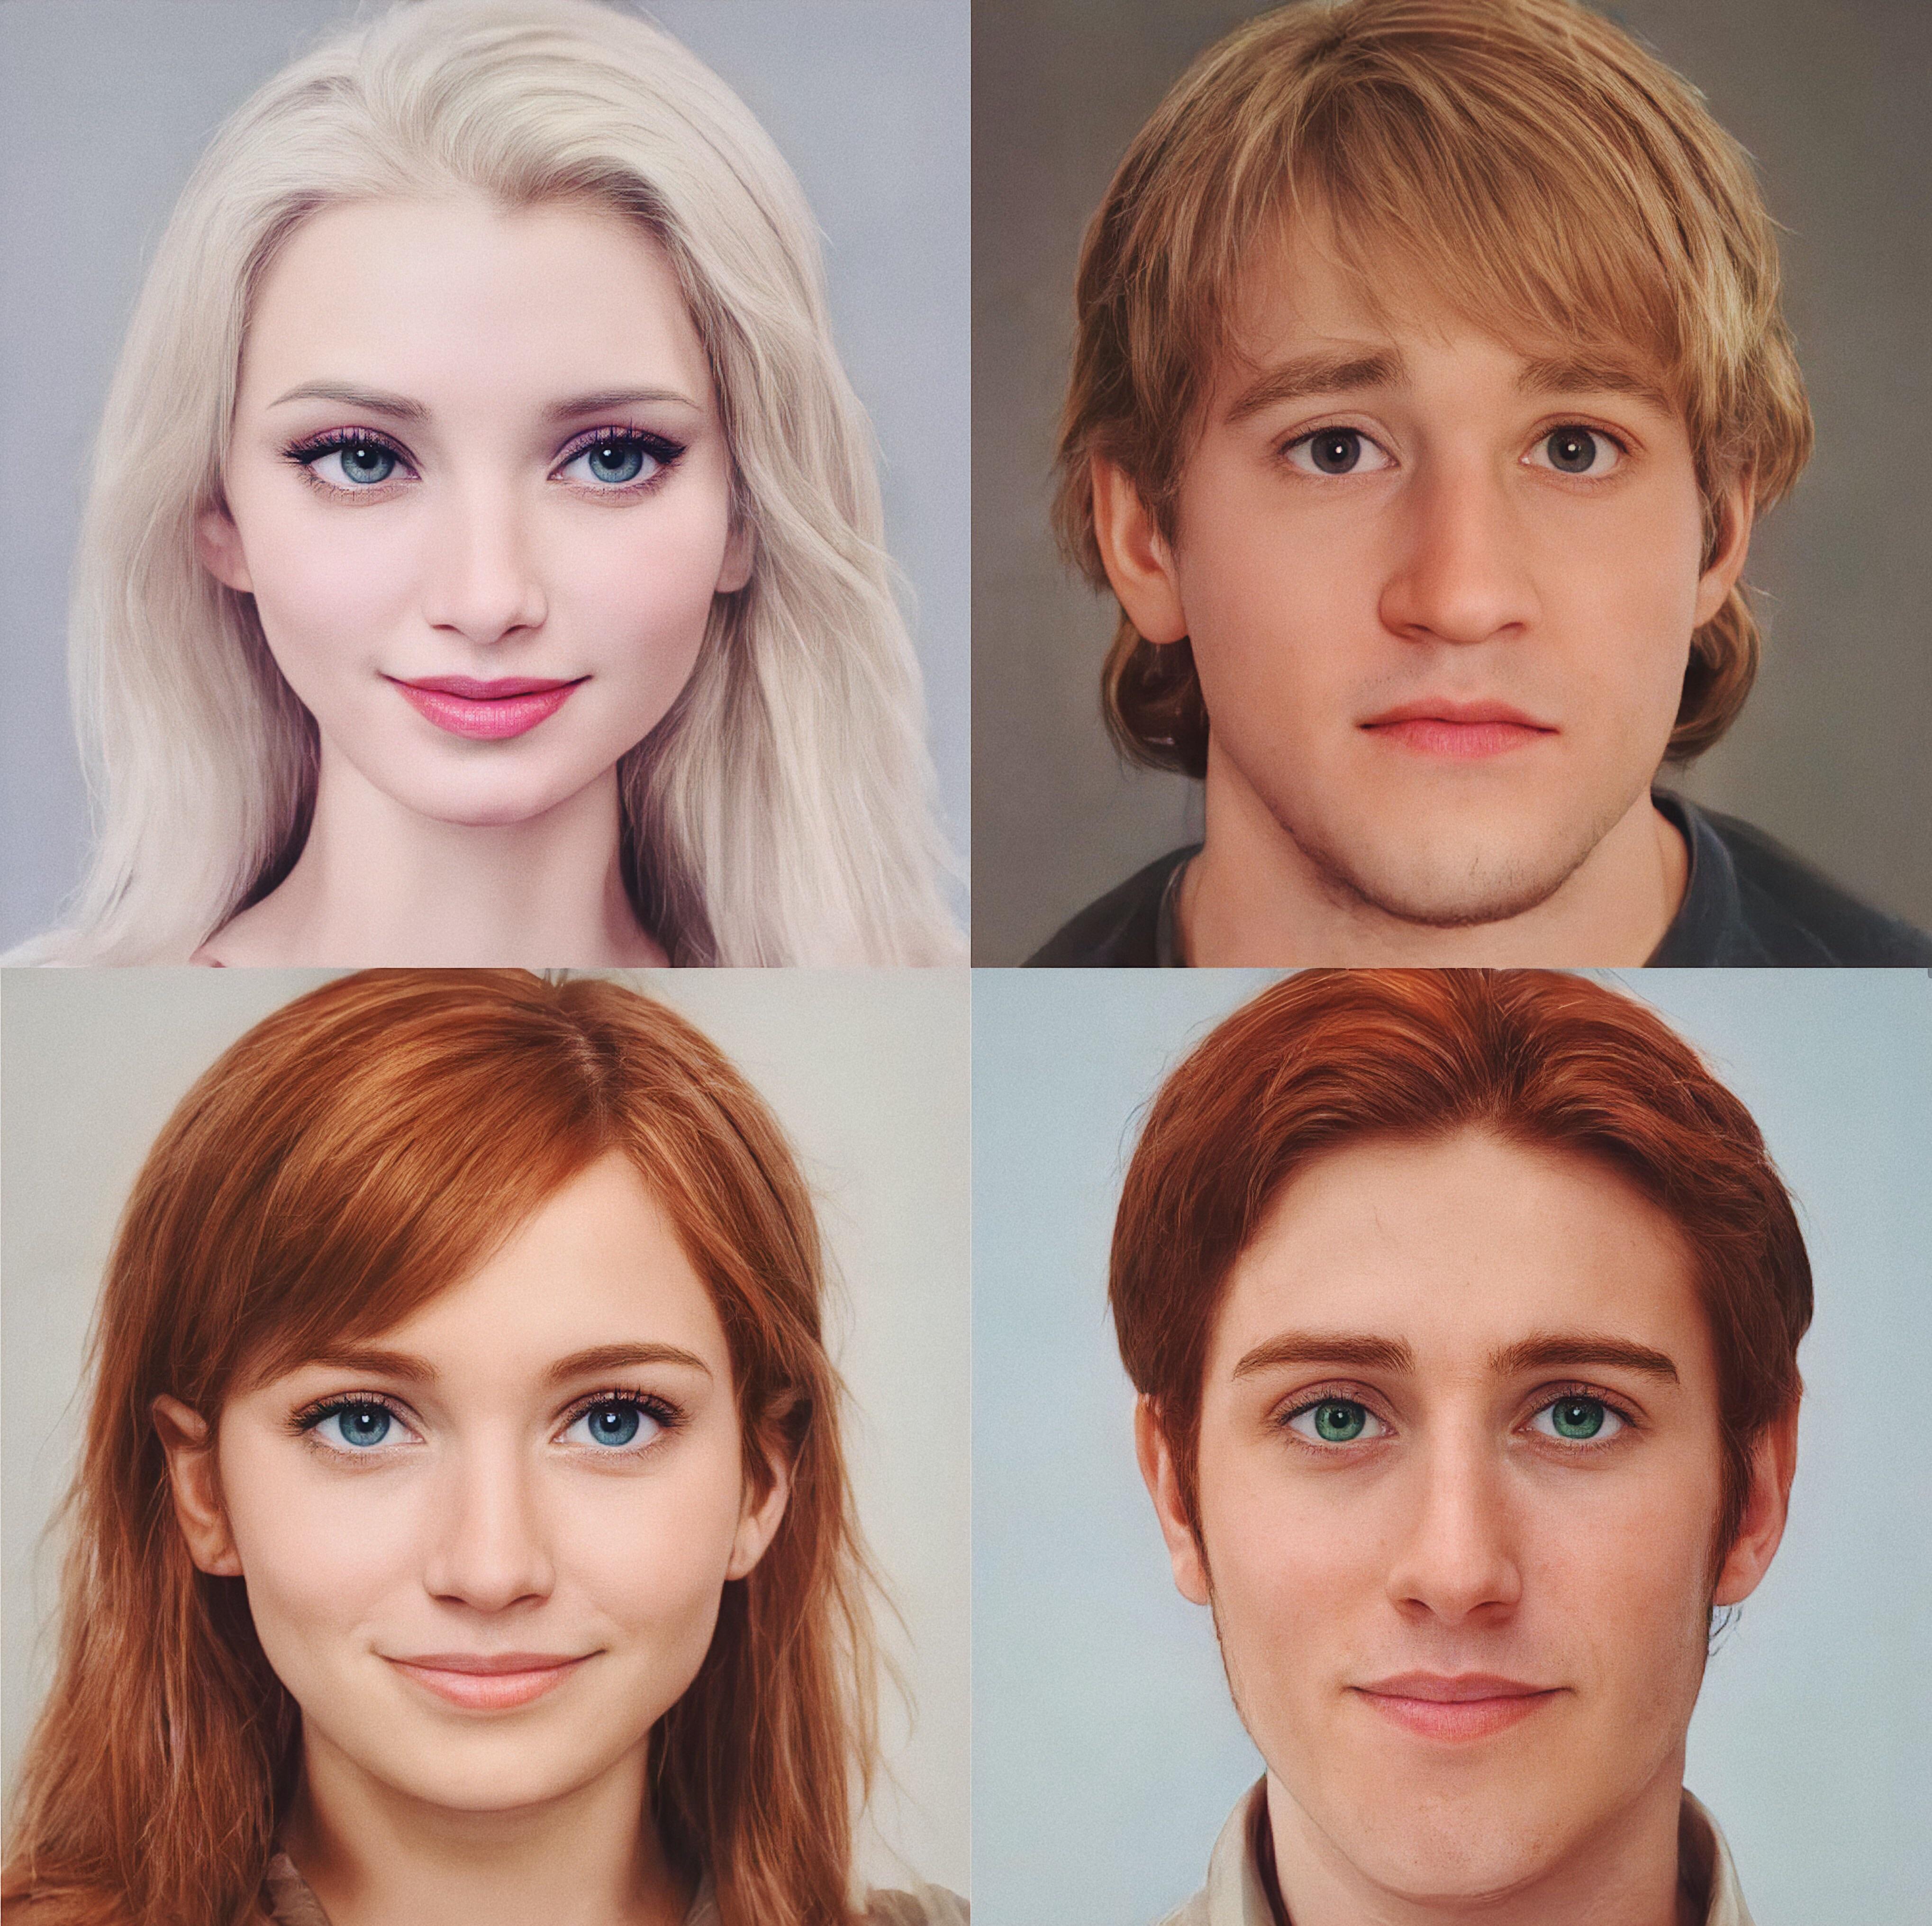 The cast of Gisney's Frozen as humanoids.